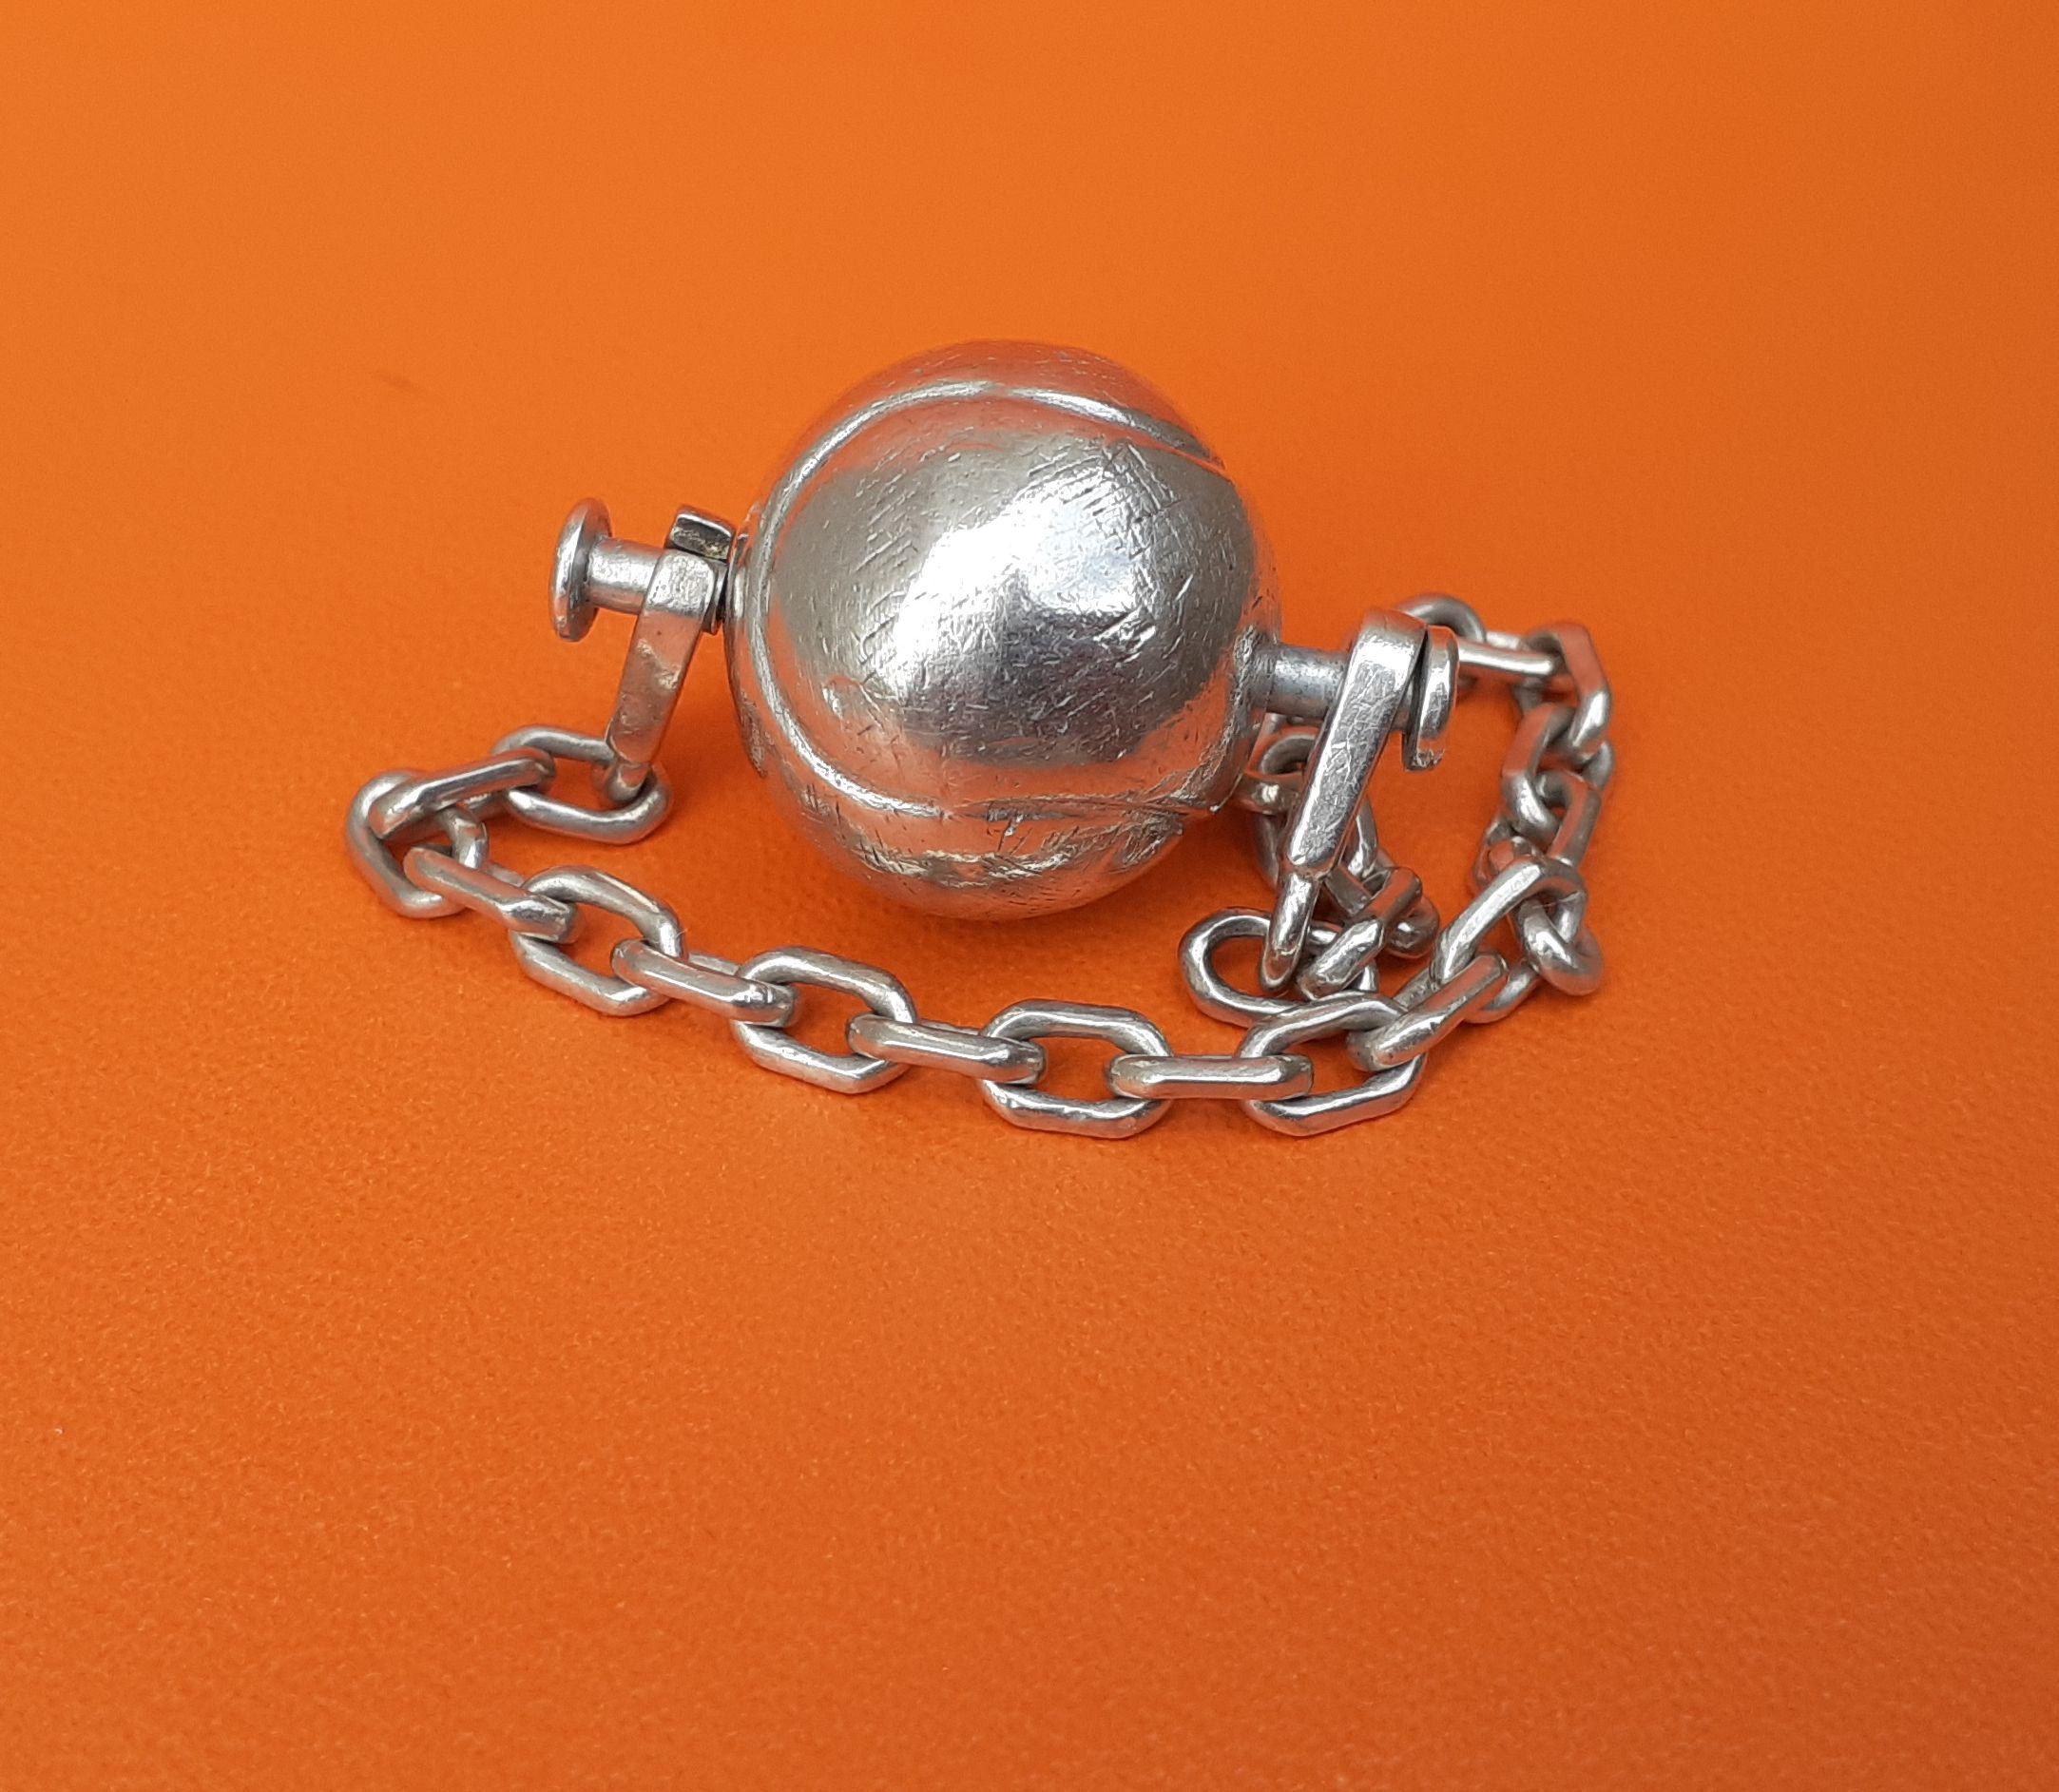 Exceptional Hermès Vintage Tennis Ball Key Ring Keychain in Silver Rare For Sale 3